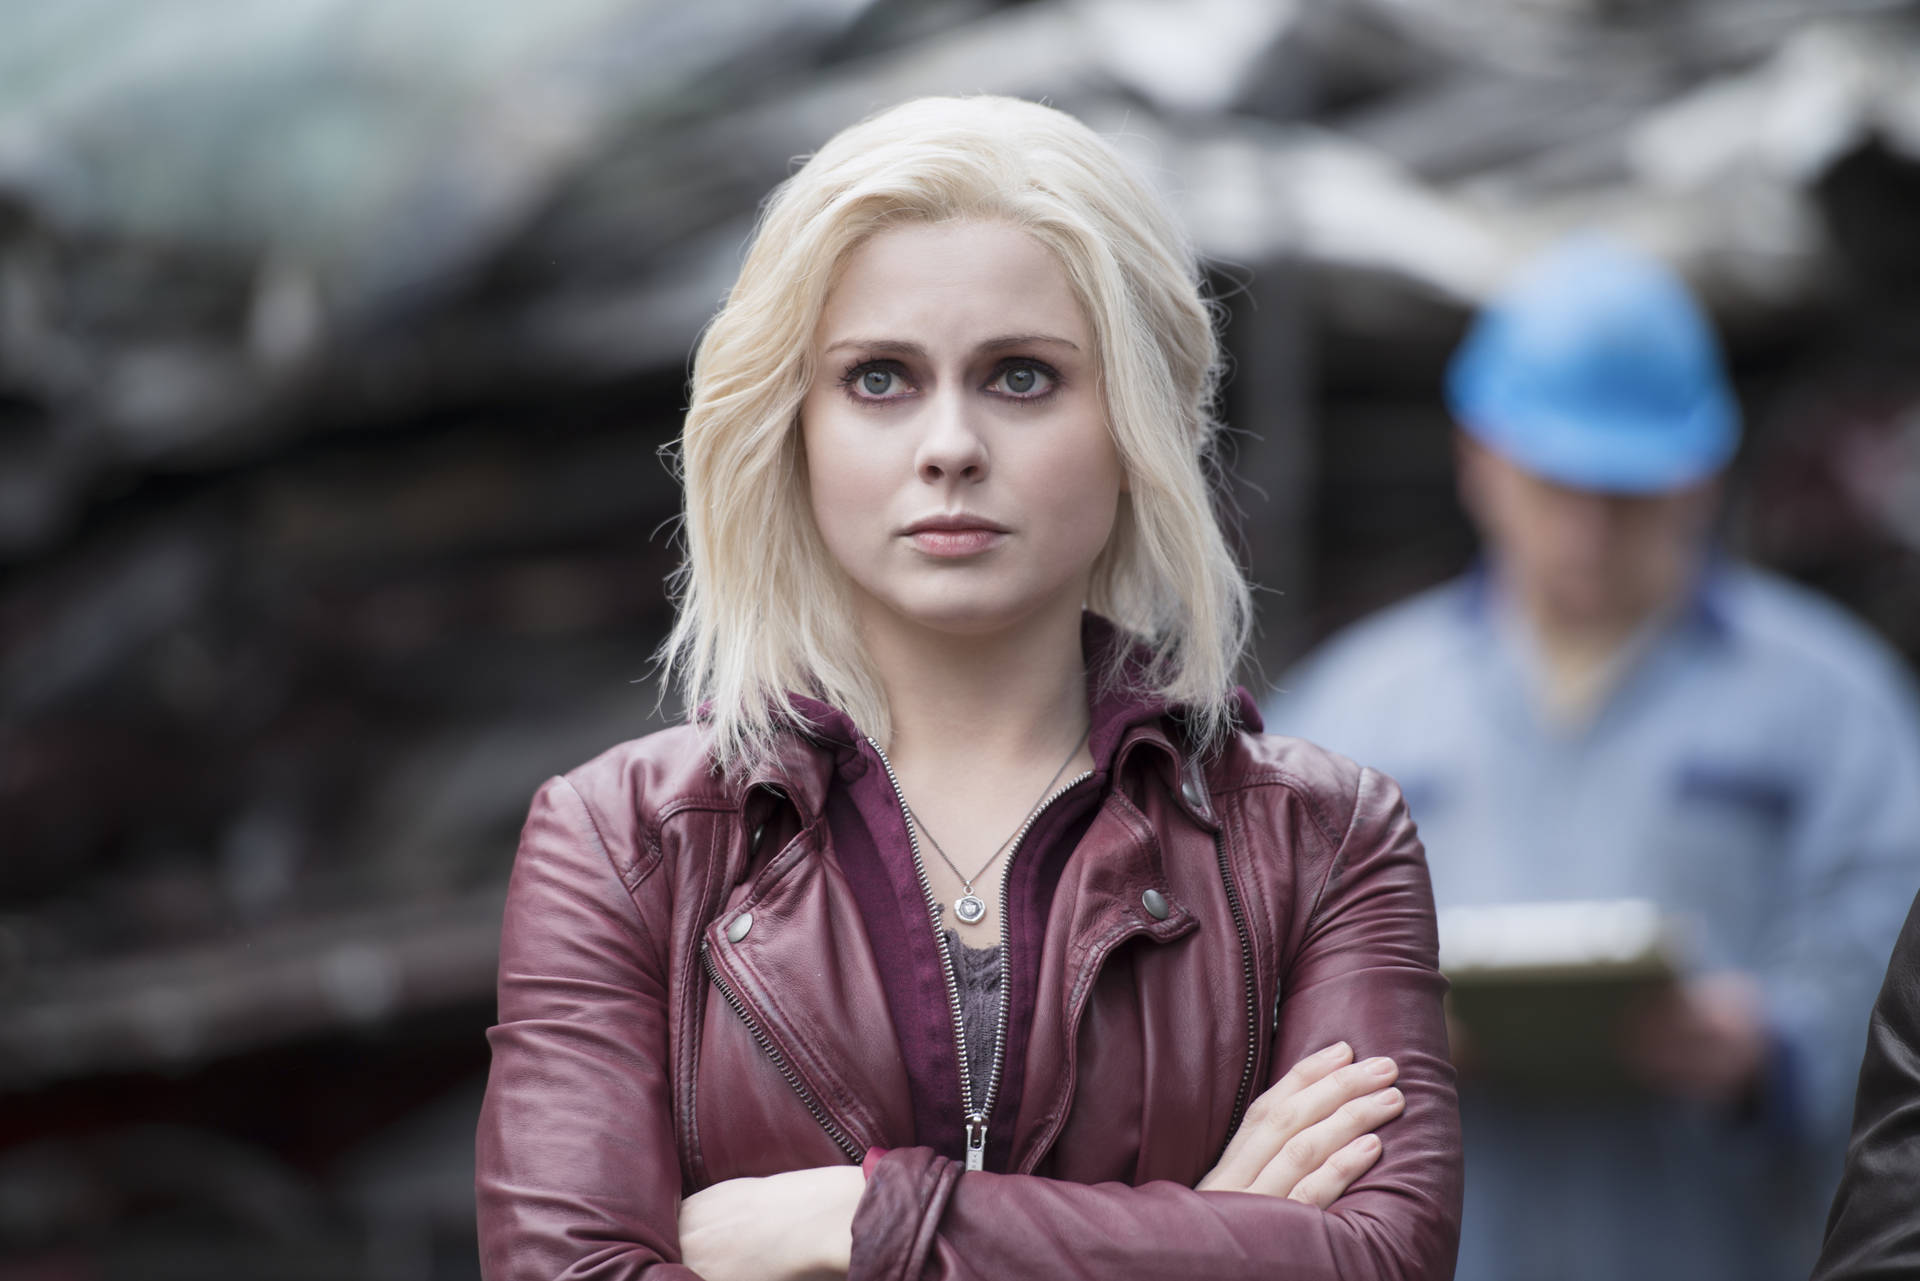 iZombie's Star Liv Moore Sporting a Red Leather Jacket Wallpaper